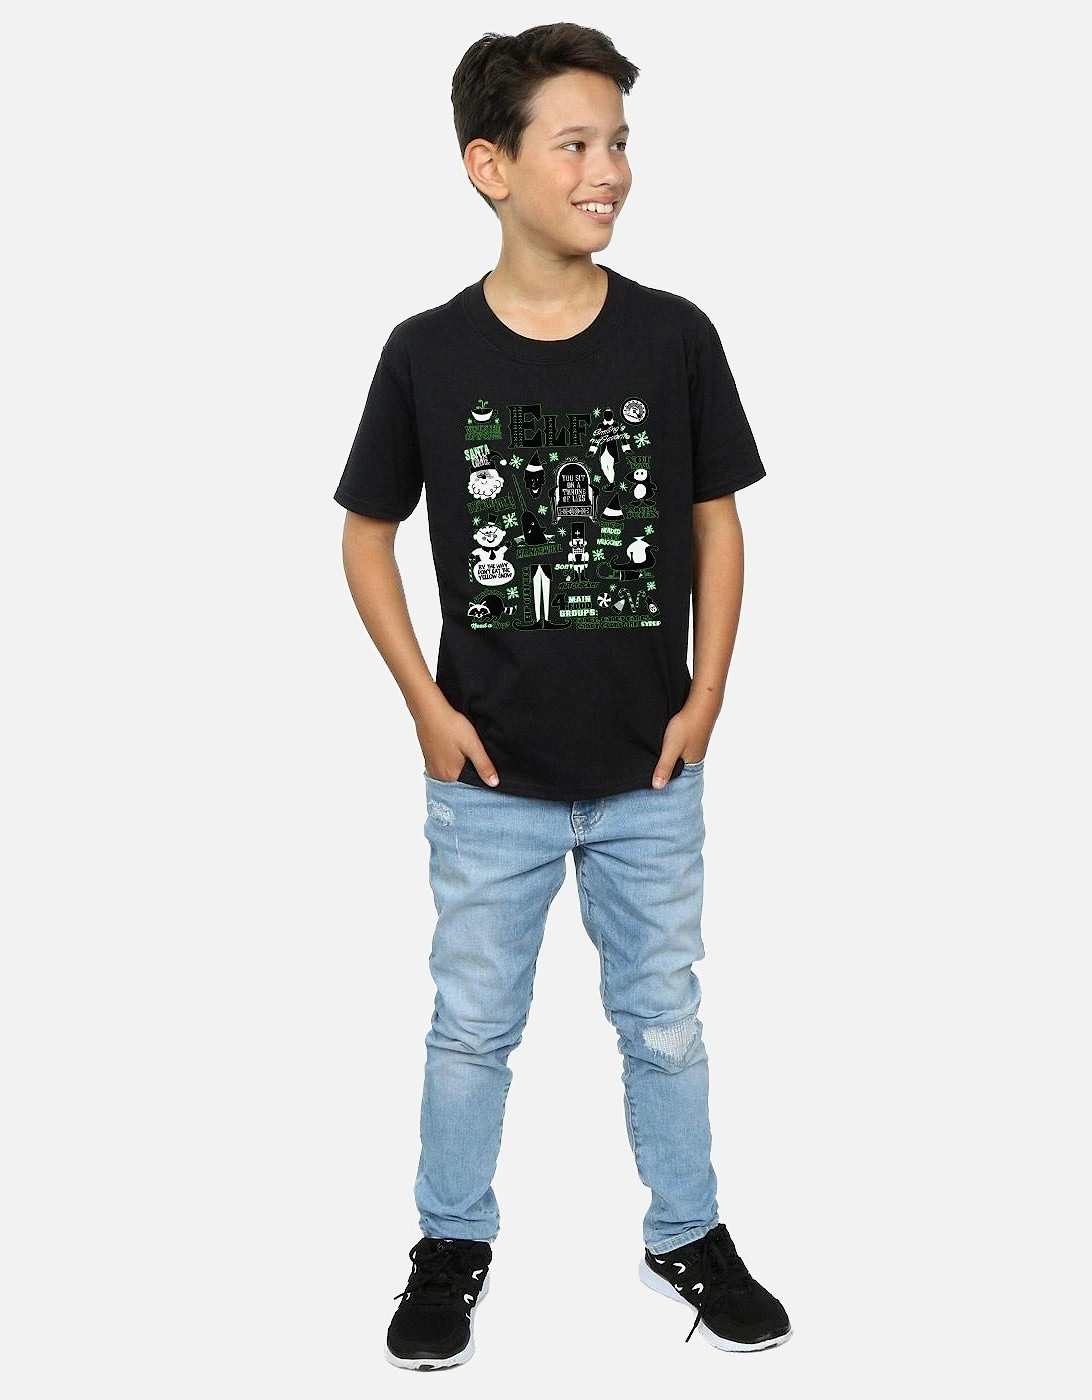 Boys Infographic Poster T-Shirt